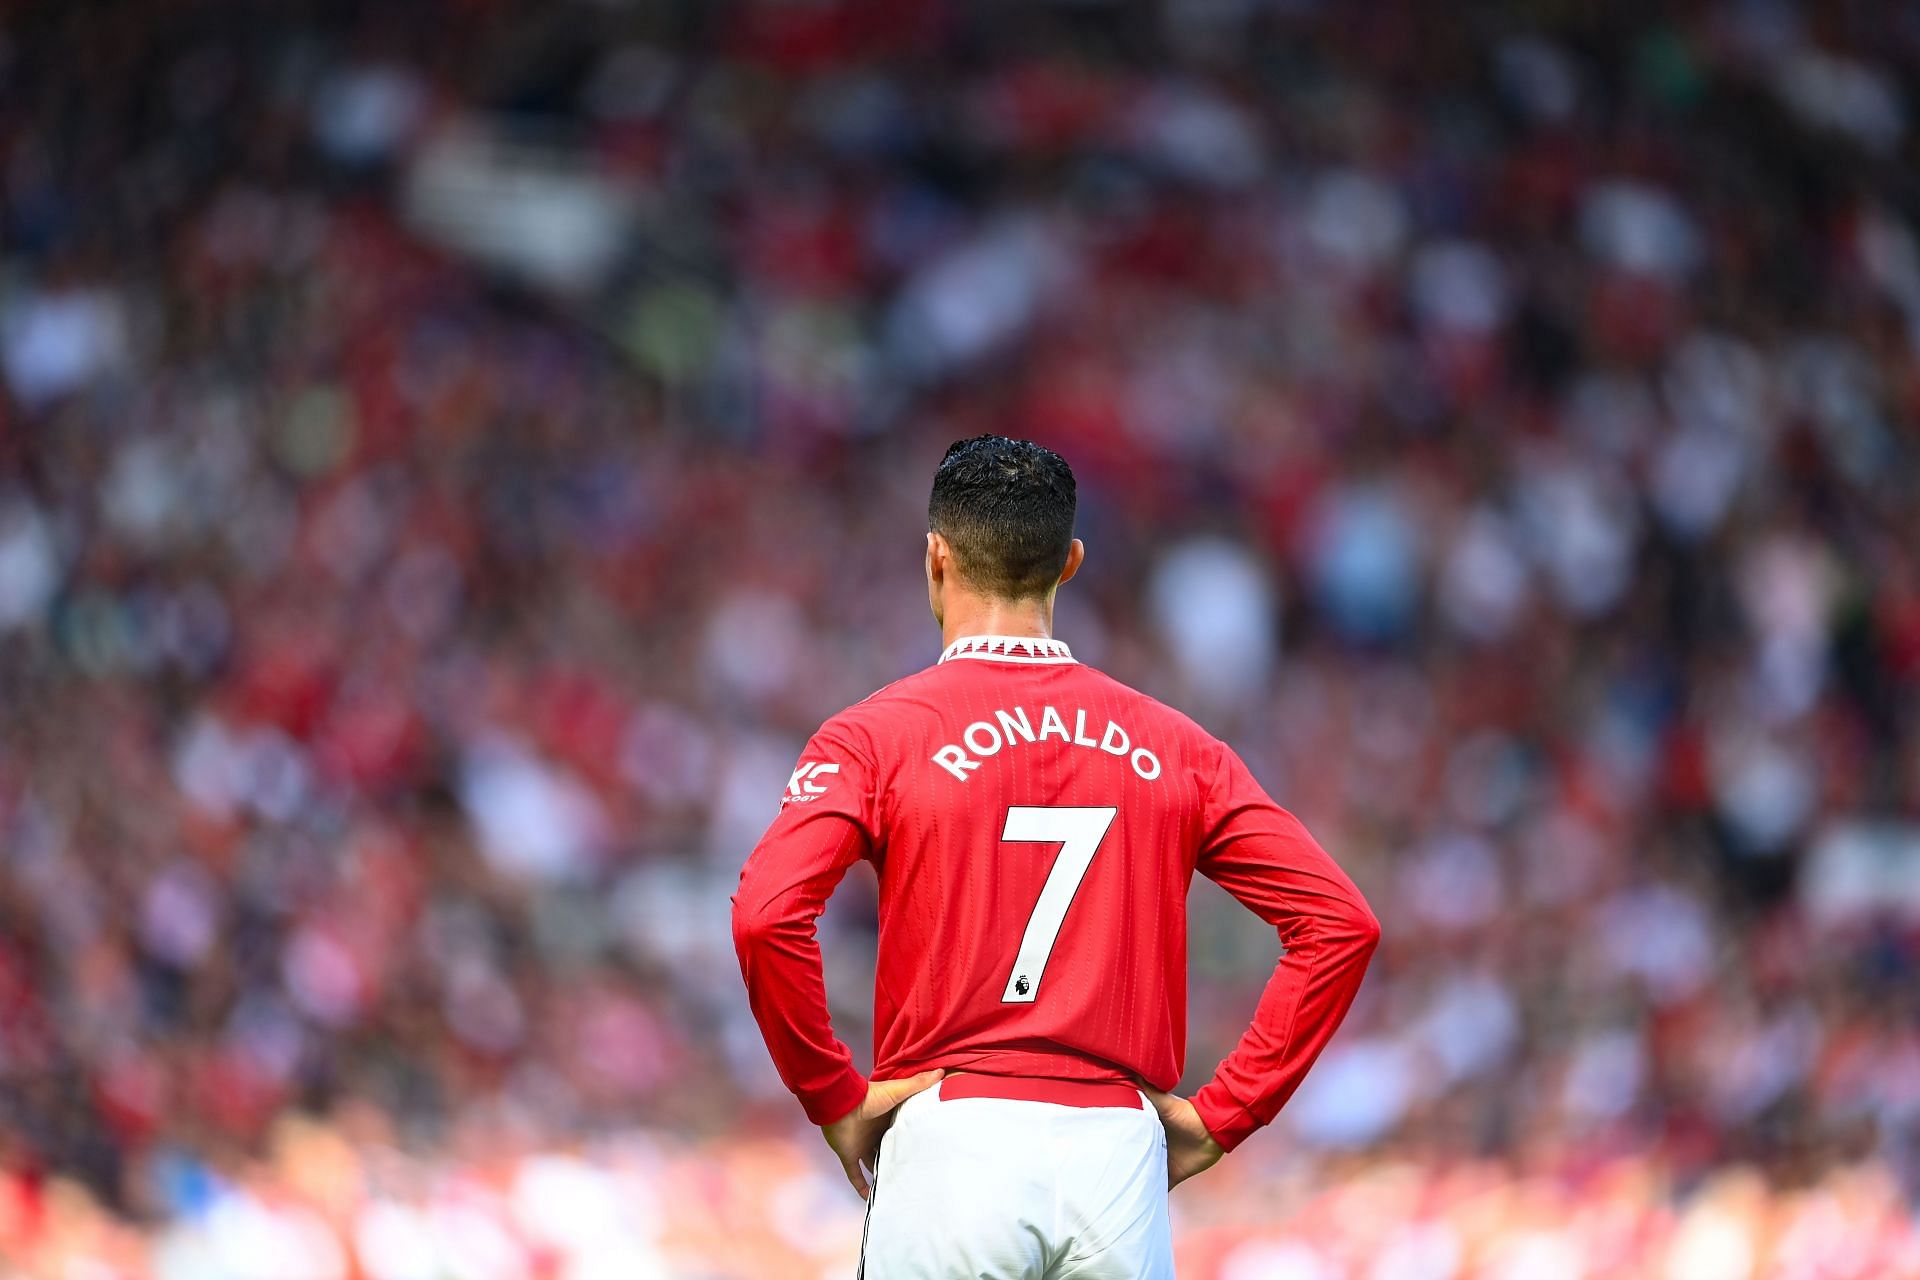 It may be time to say goodbye to Cristiano Ronaldo